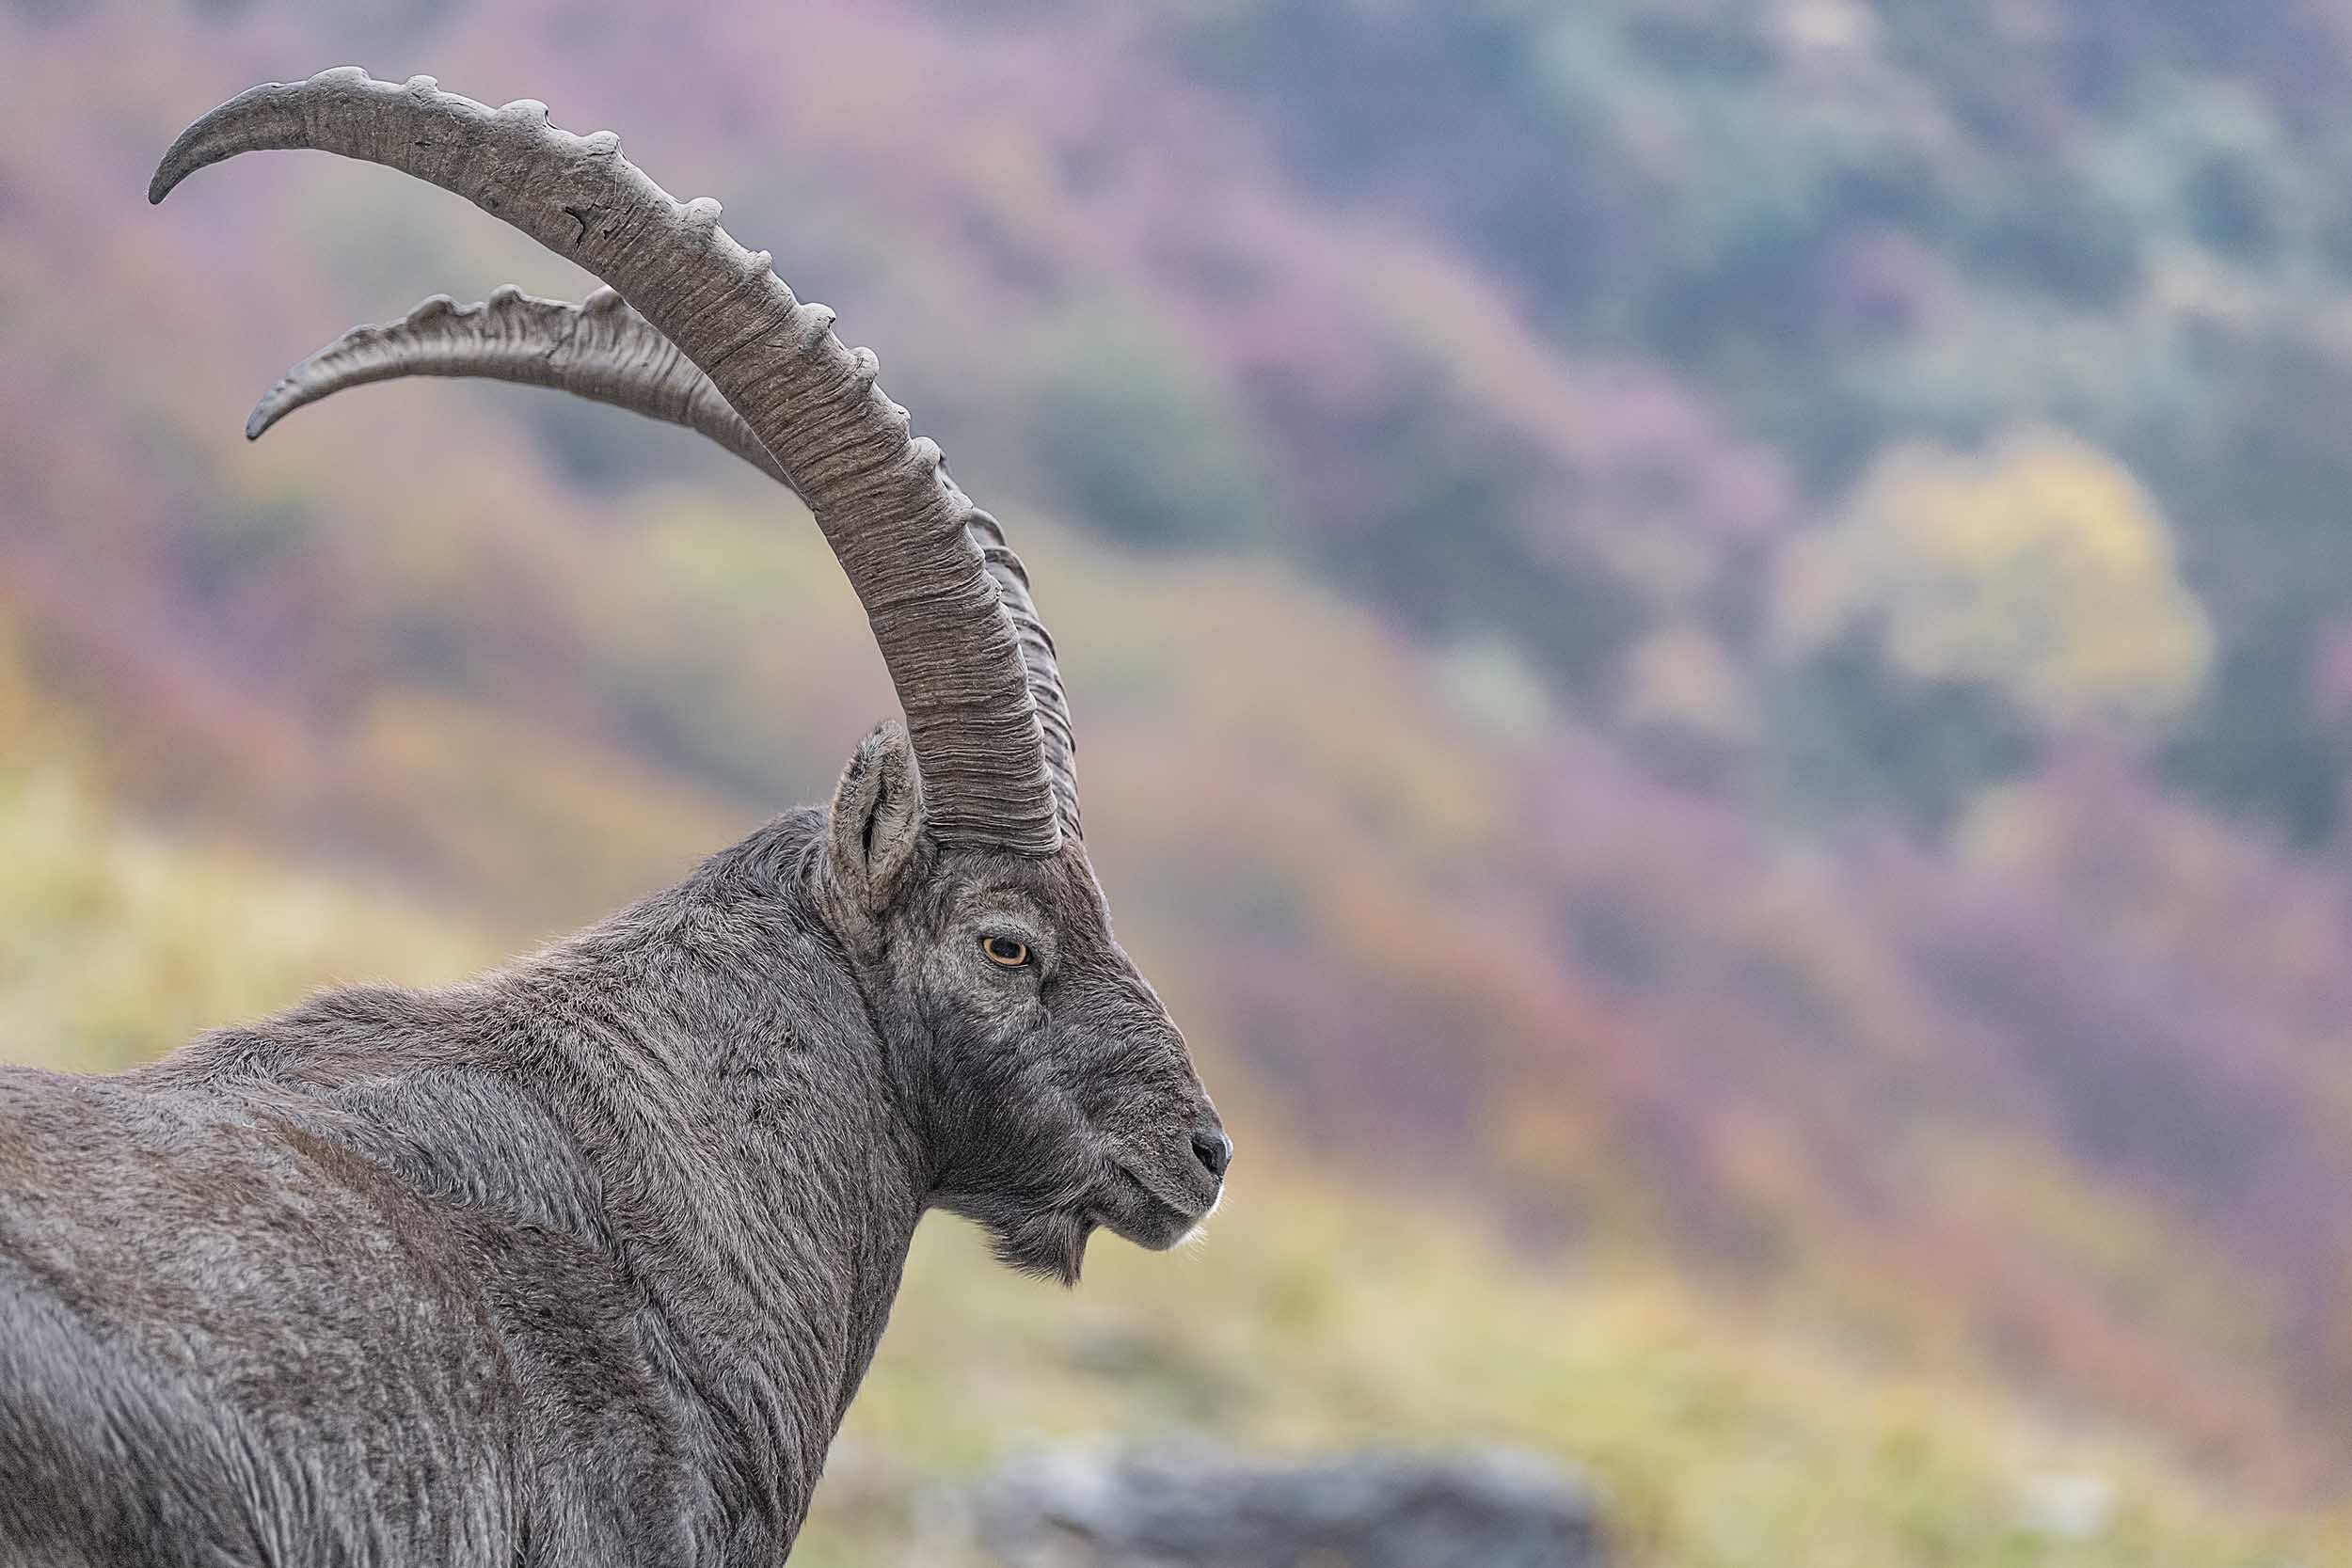 An Ibex stood in front of a mountain